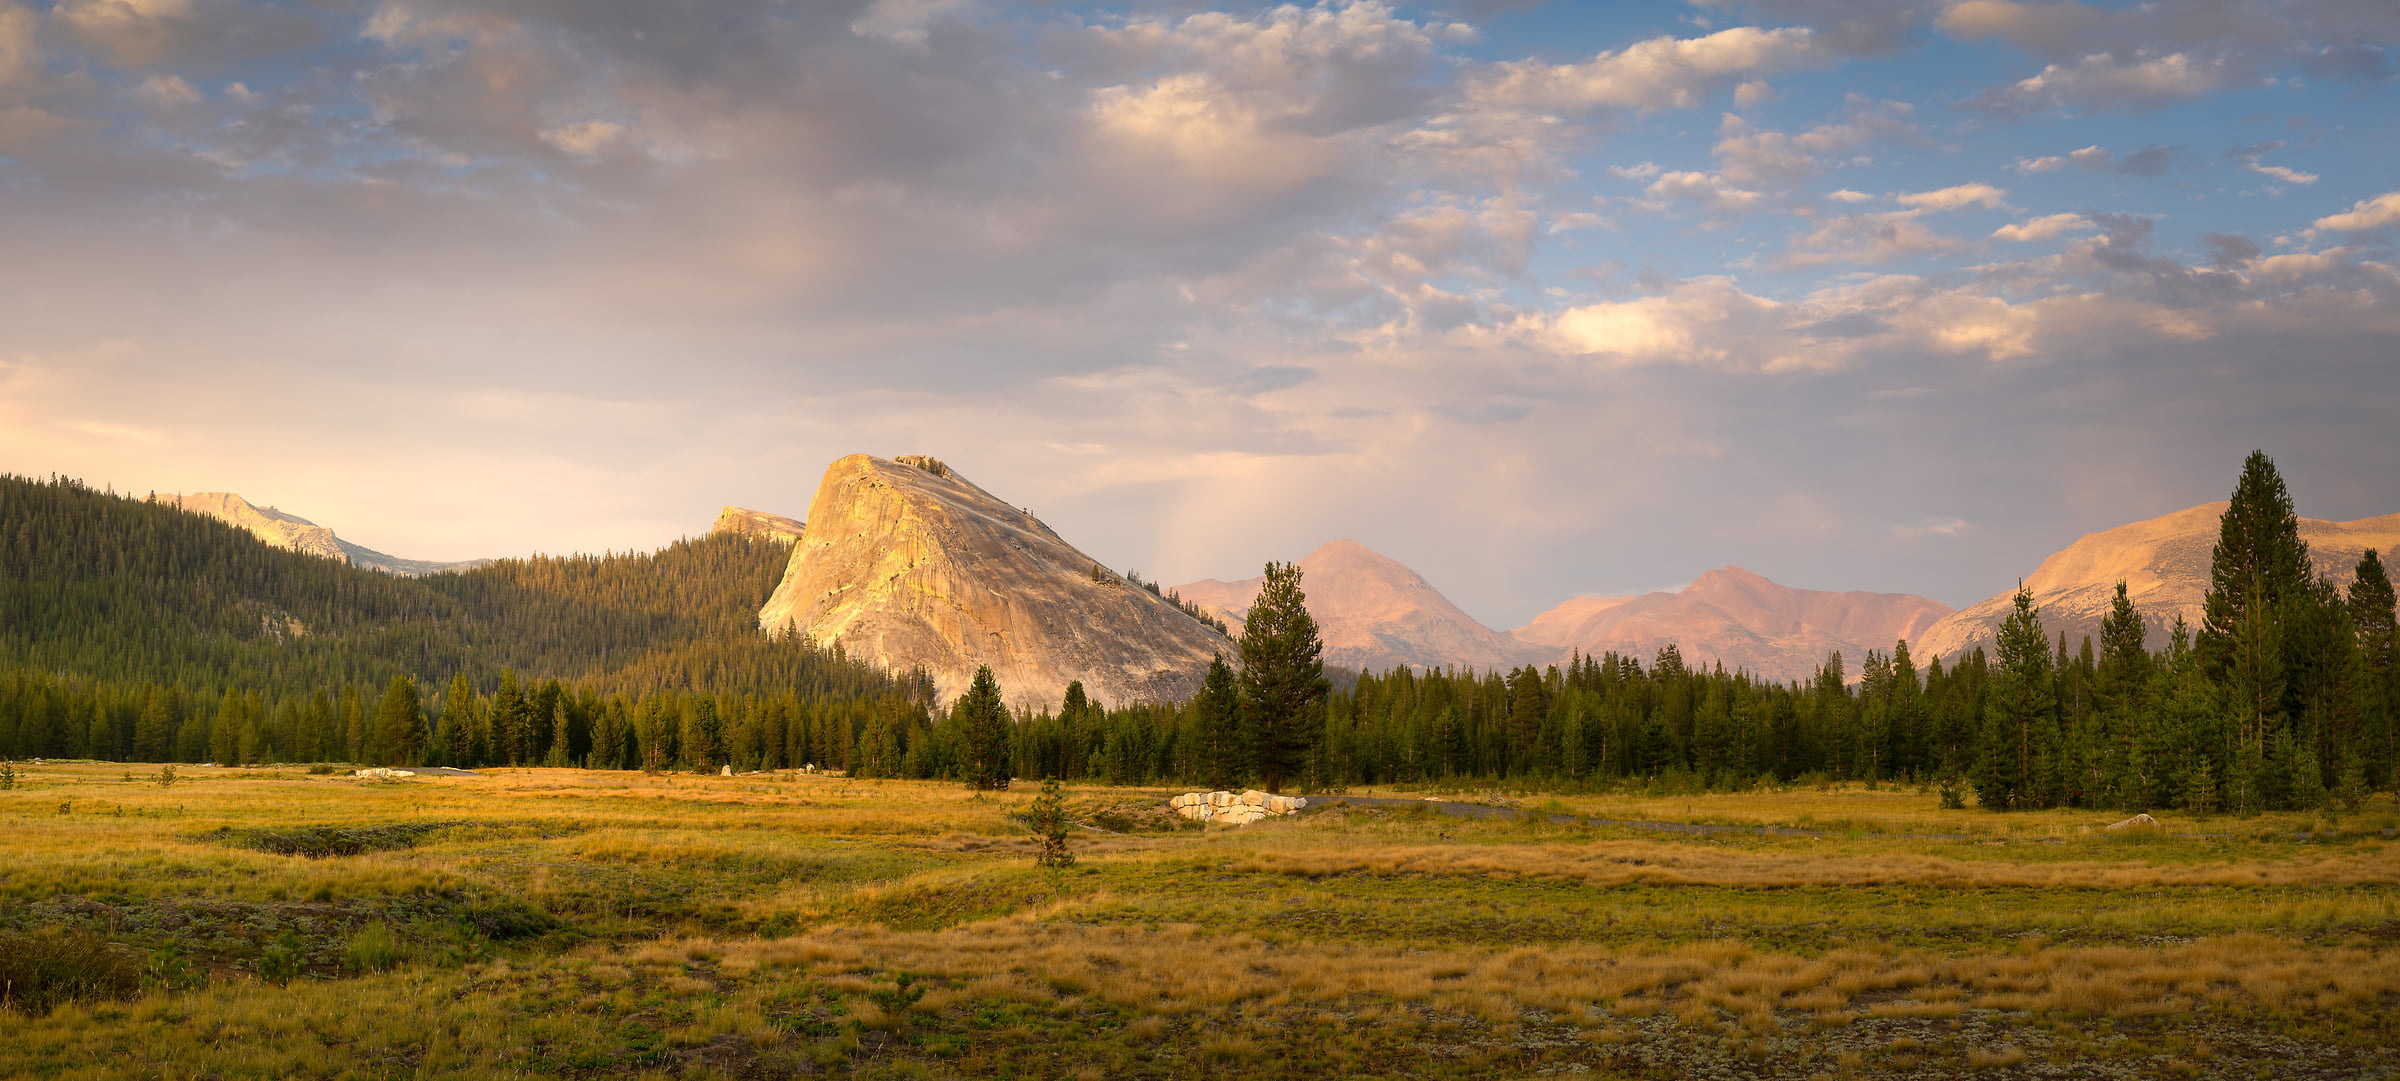 232 megapixels! A very high resolution, large-format VAST photo print of a landscape scene with a meadow, mountains, sky, and sunset; landscape photograph created by Jeff Lewis in Tuolumne Meadows, Yosemite National Park, California